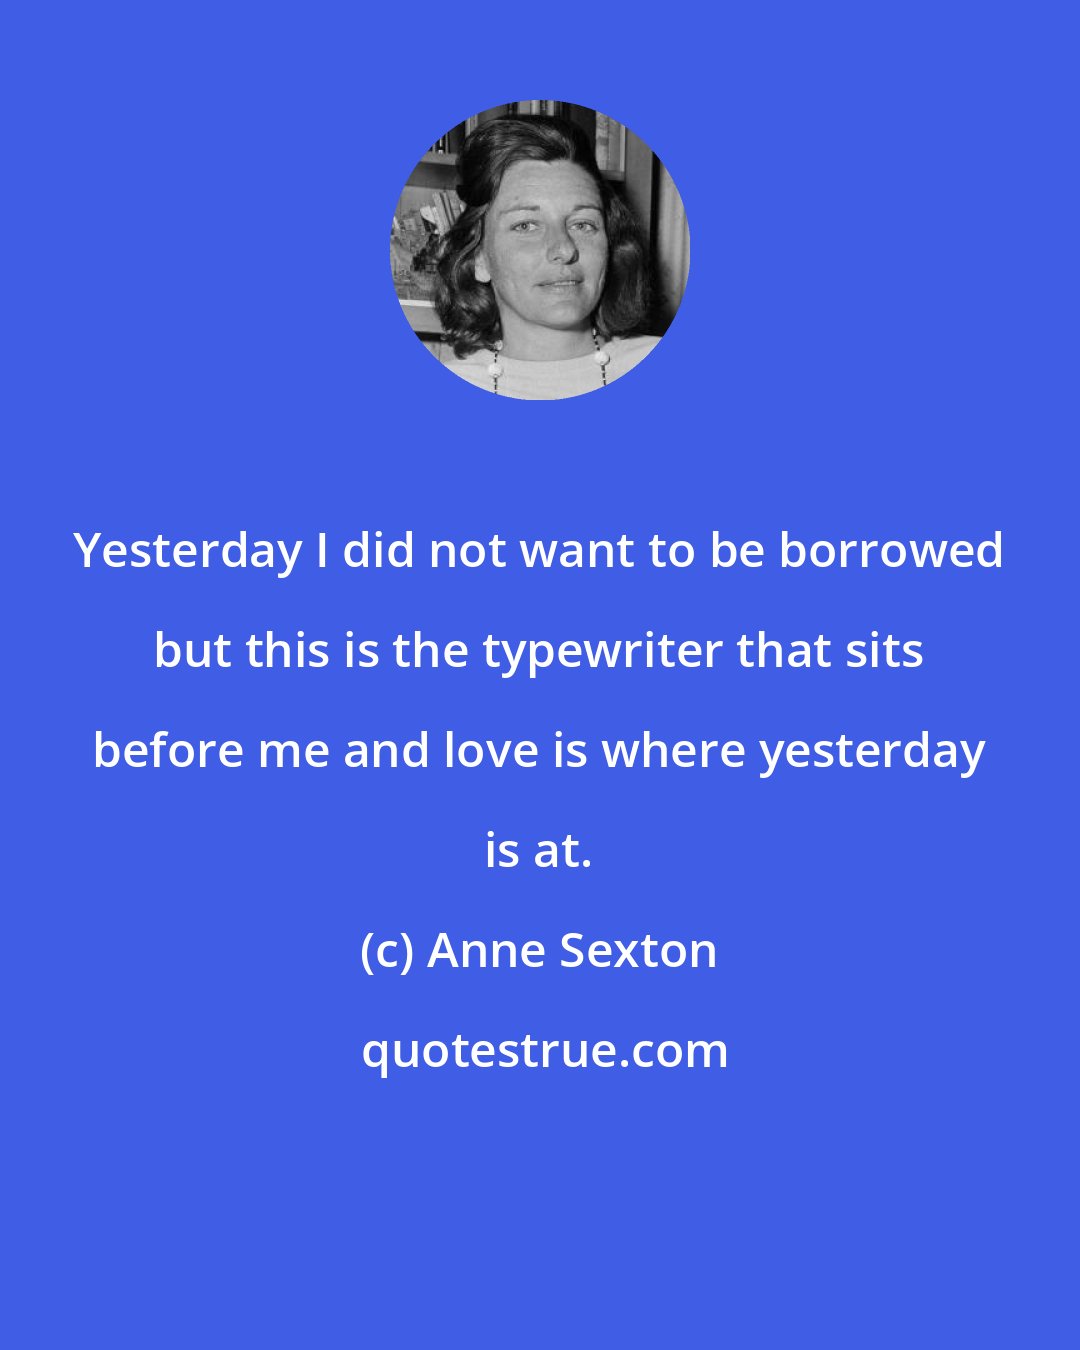 Anne Sexton: Yesterday I did not want to be borrowed but this is the typewriter that sits before me and love is where yesterday is at.